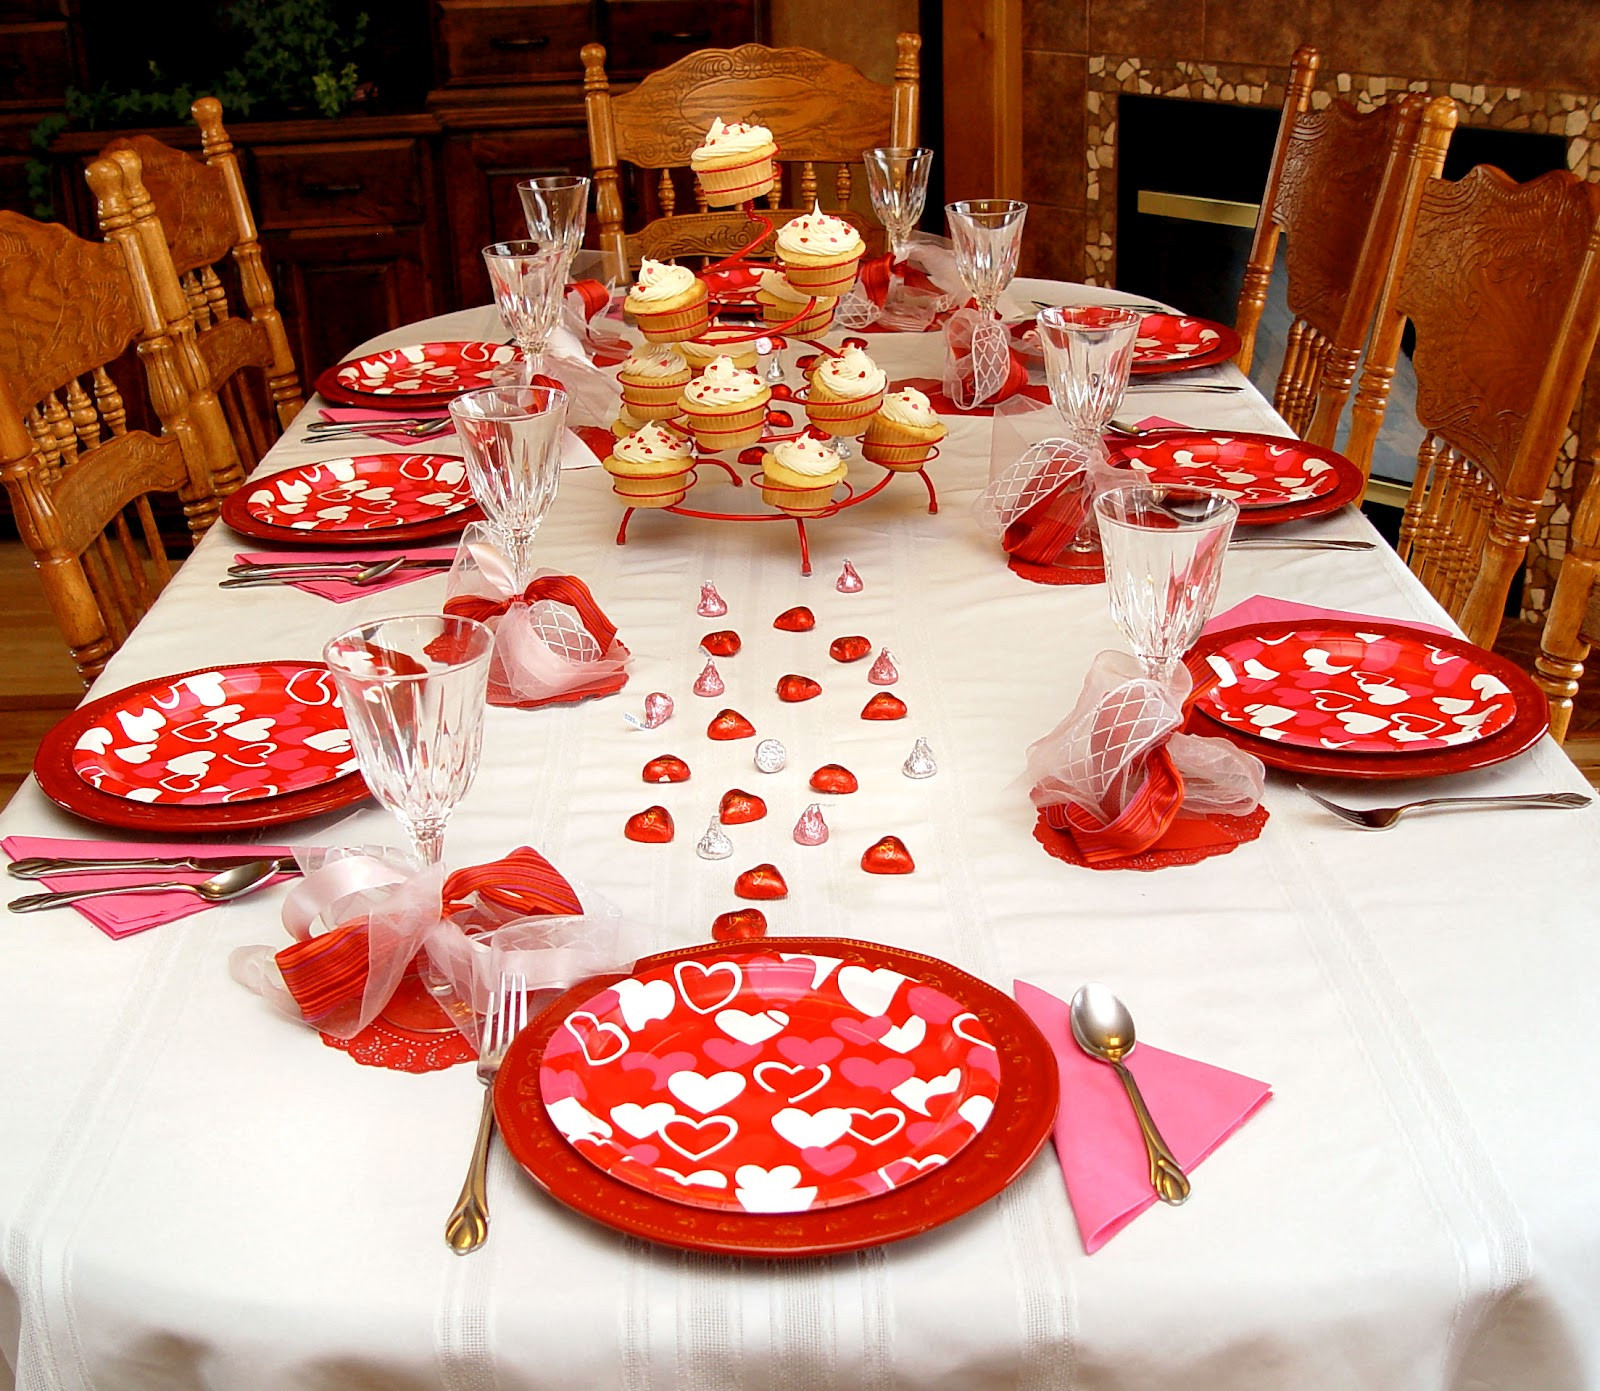 Family Valentine Dinners Inspirational Family Valentines Dinner Idea and How to Make A Junk Bow